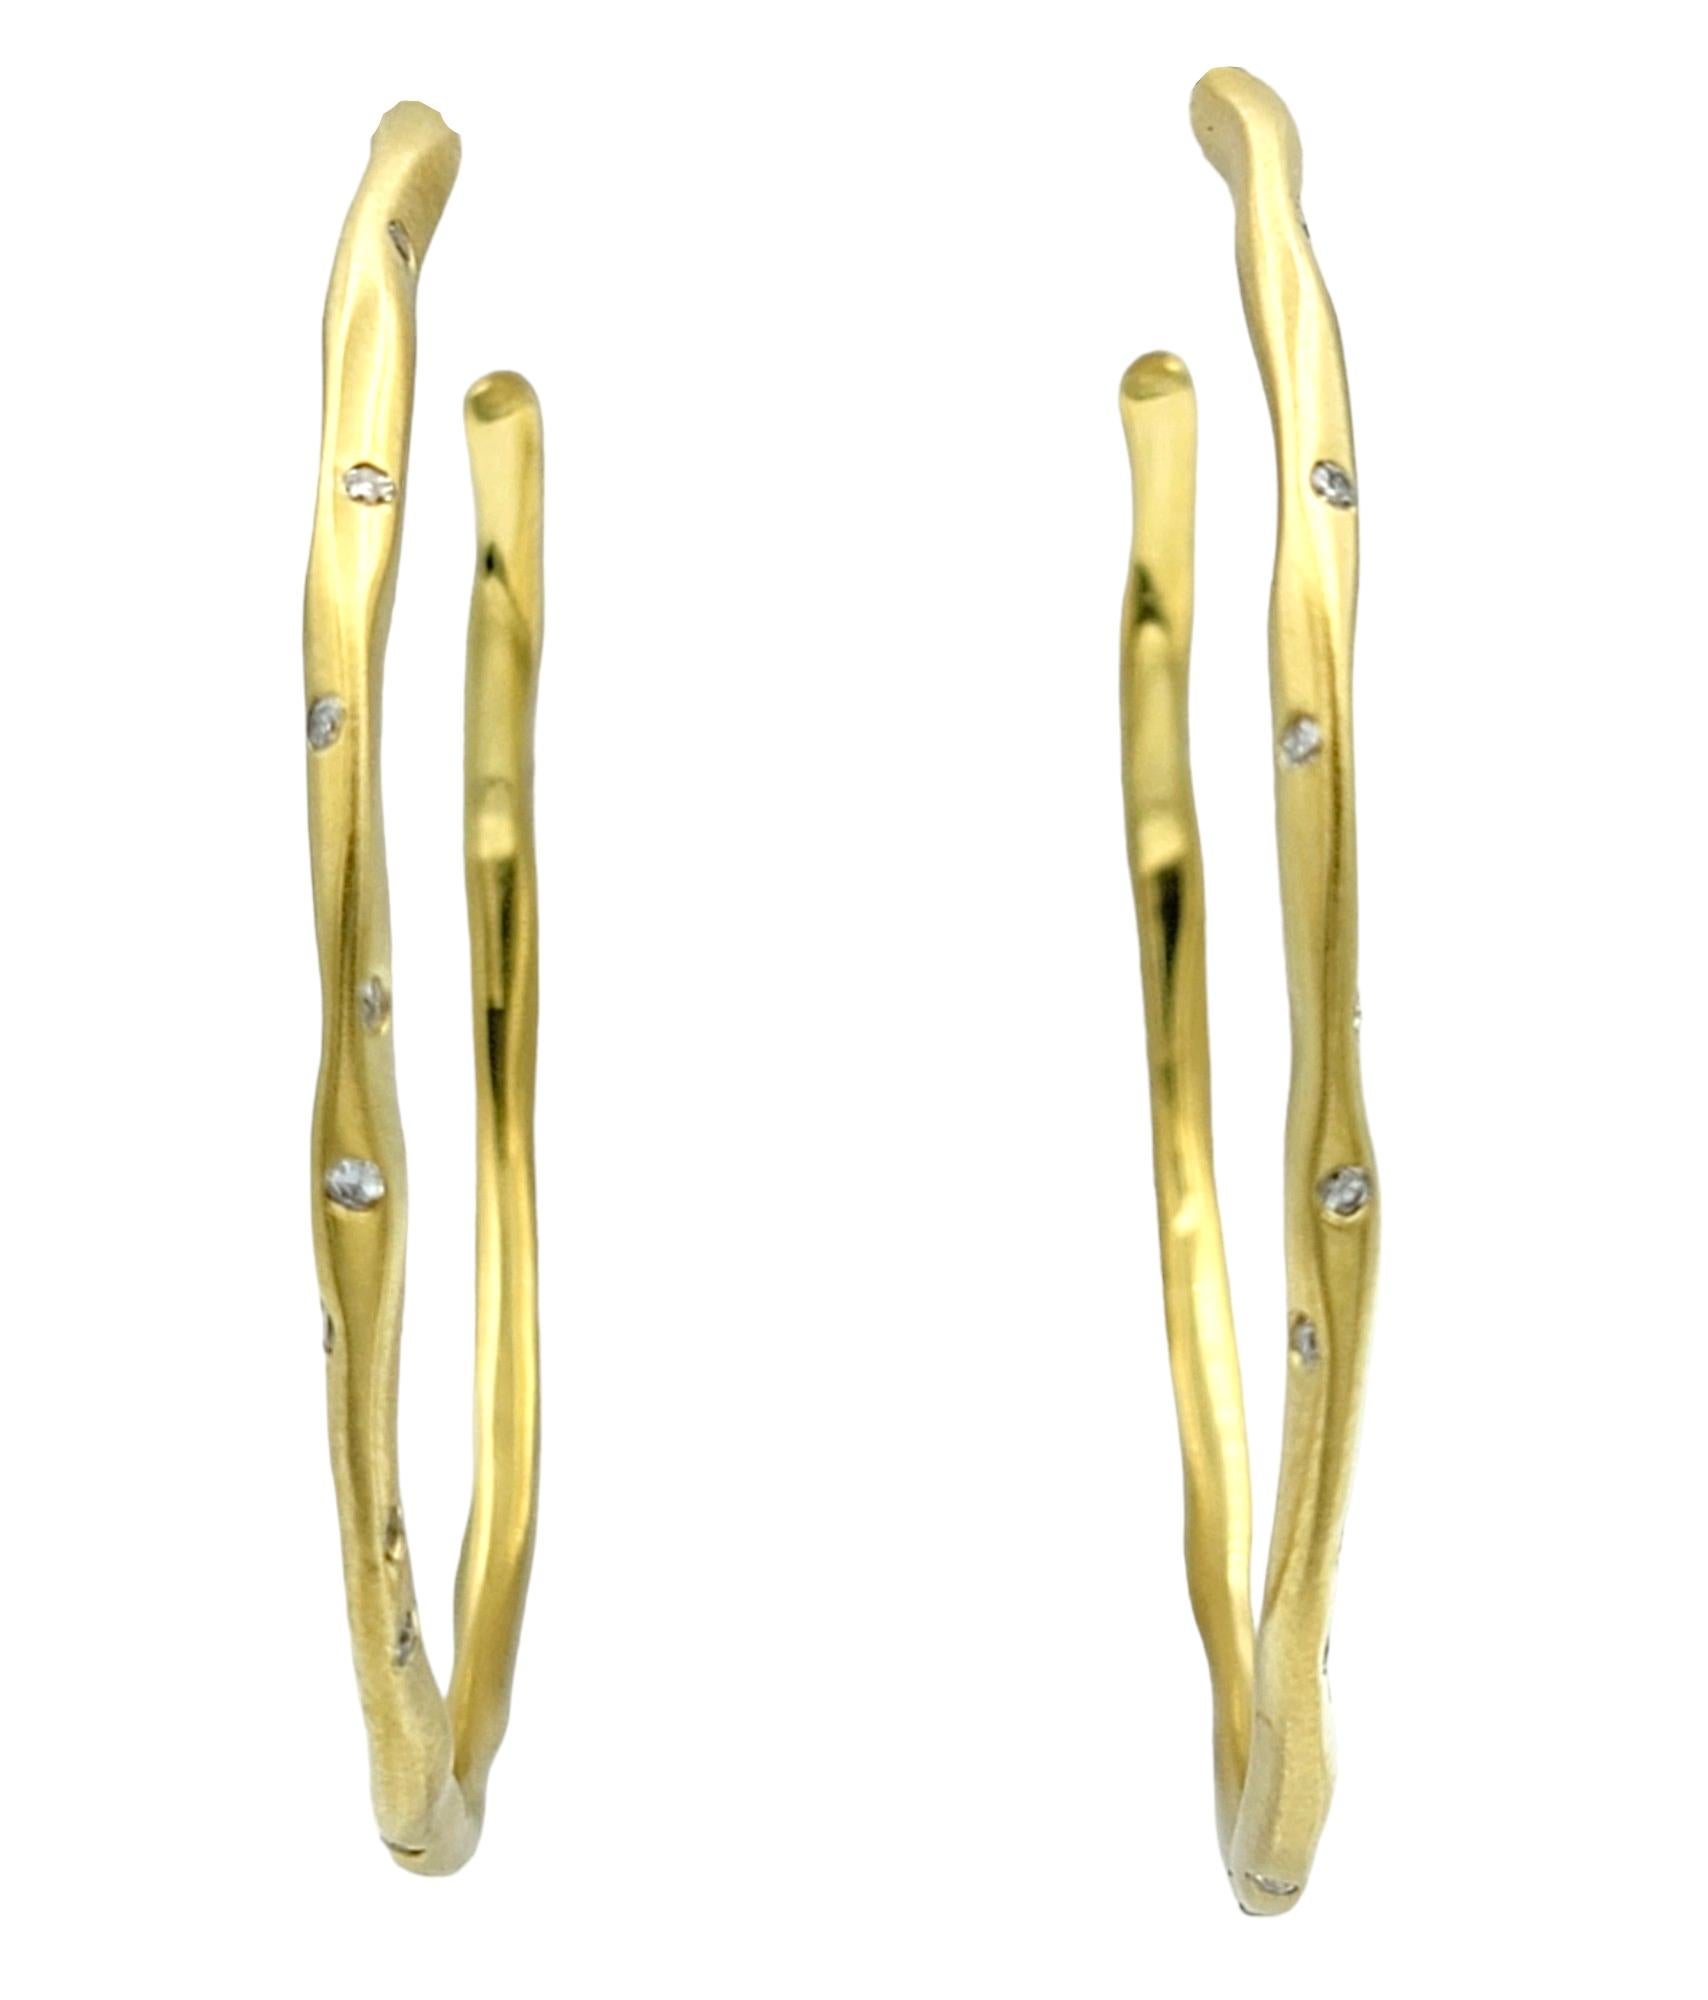 These dazzling diamond hoop earrings, set in luxurious 18 karat yellow gold, exude a modern and refined elegance. The sizeable hoops are done in a brushed finish with a hammered design, giving a contemporary and unique element to the pair. Scattered